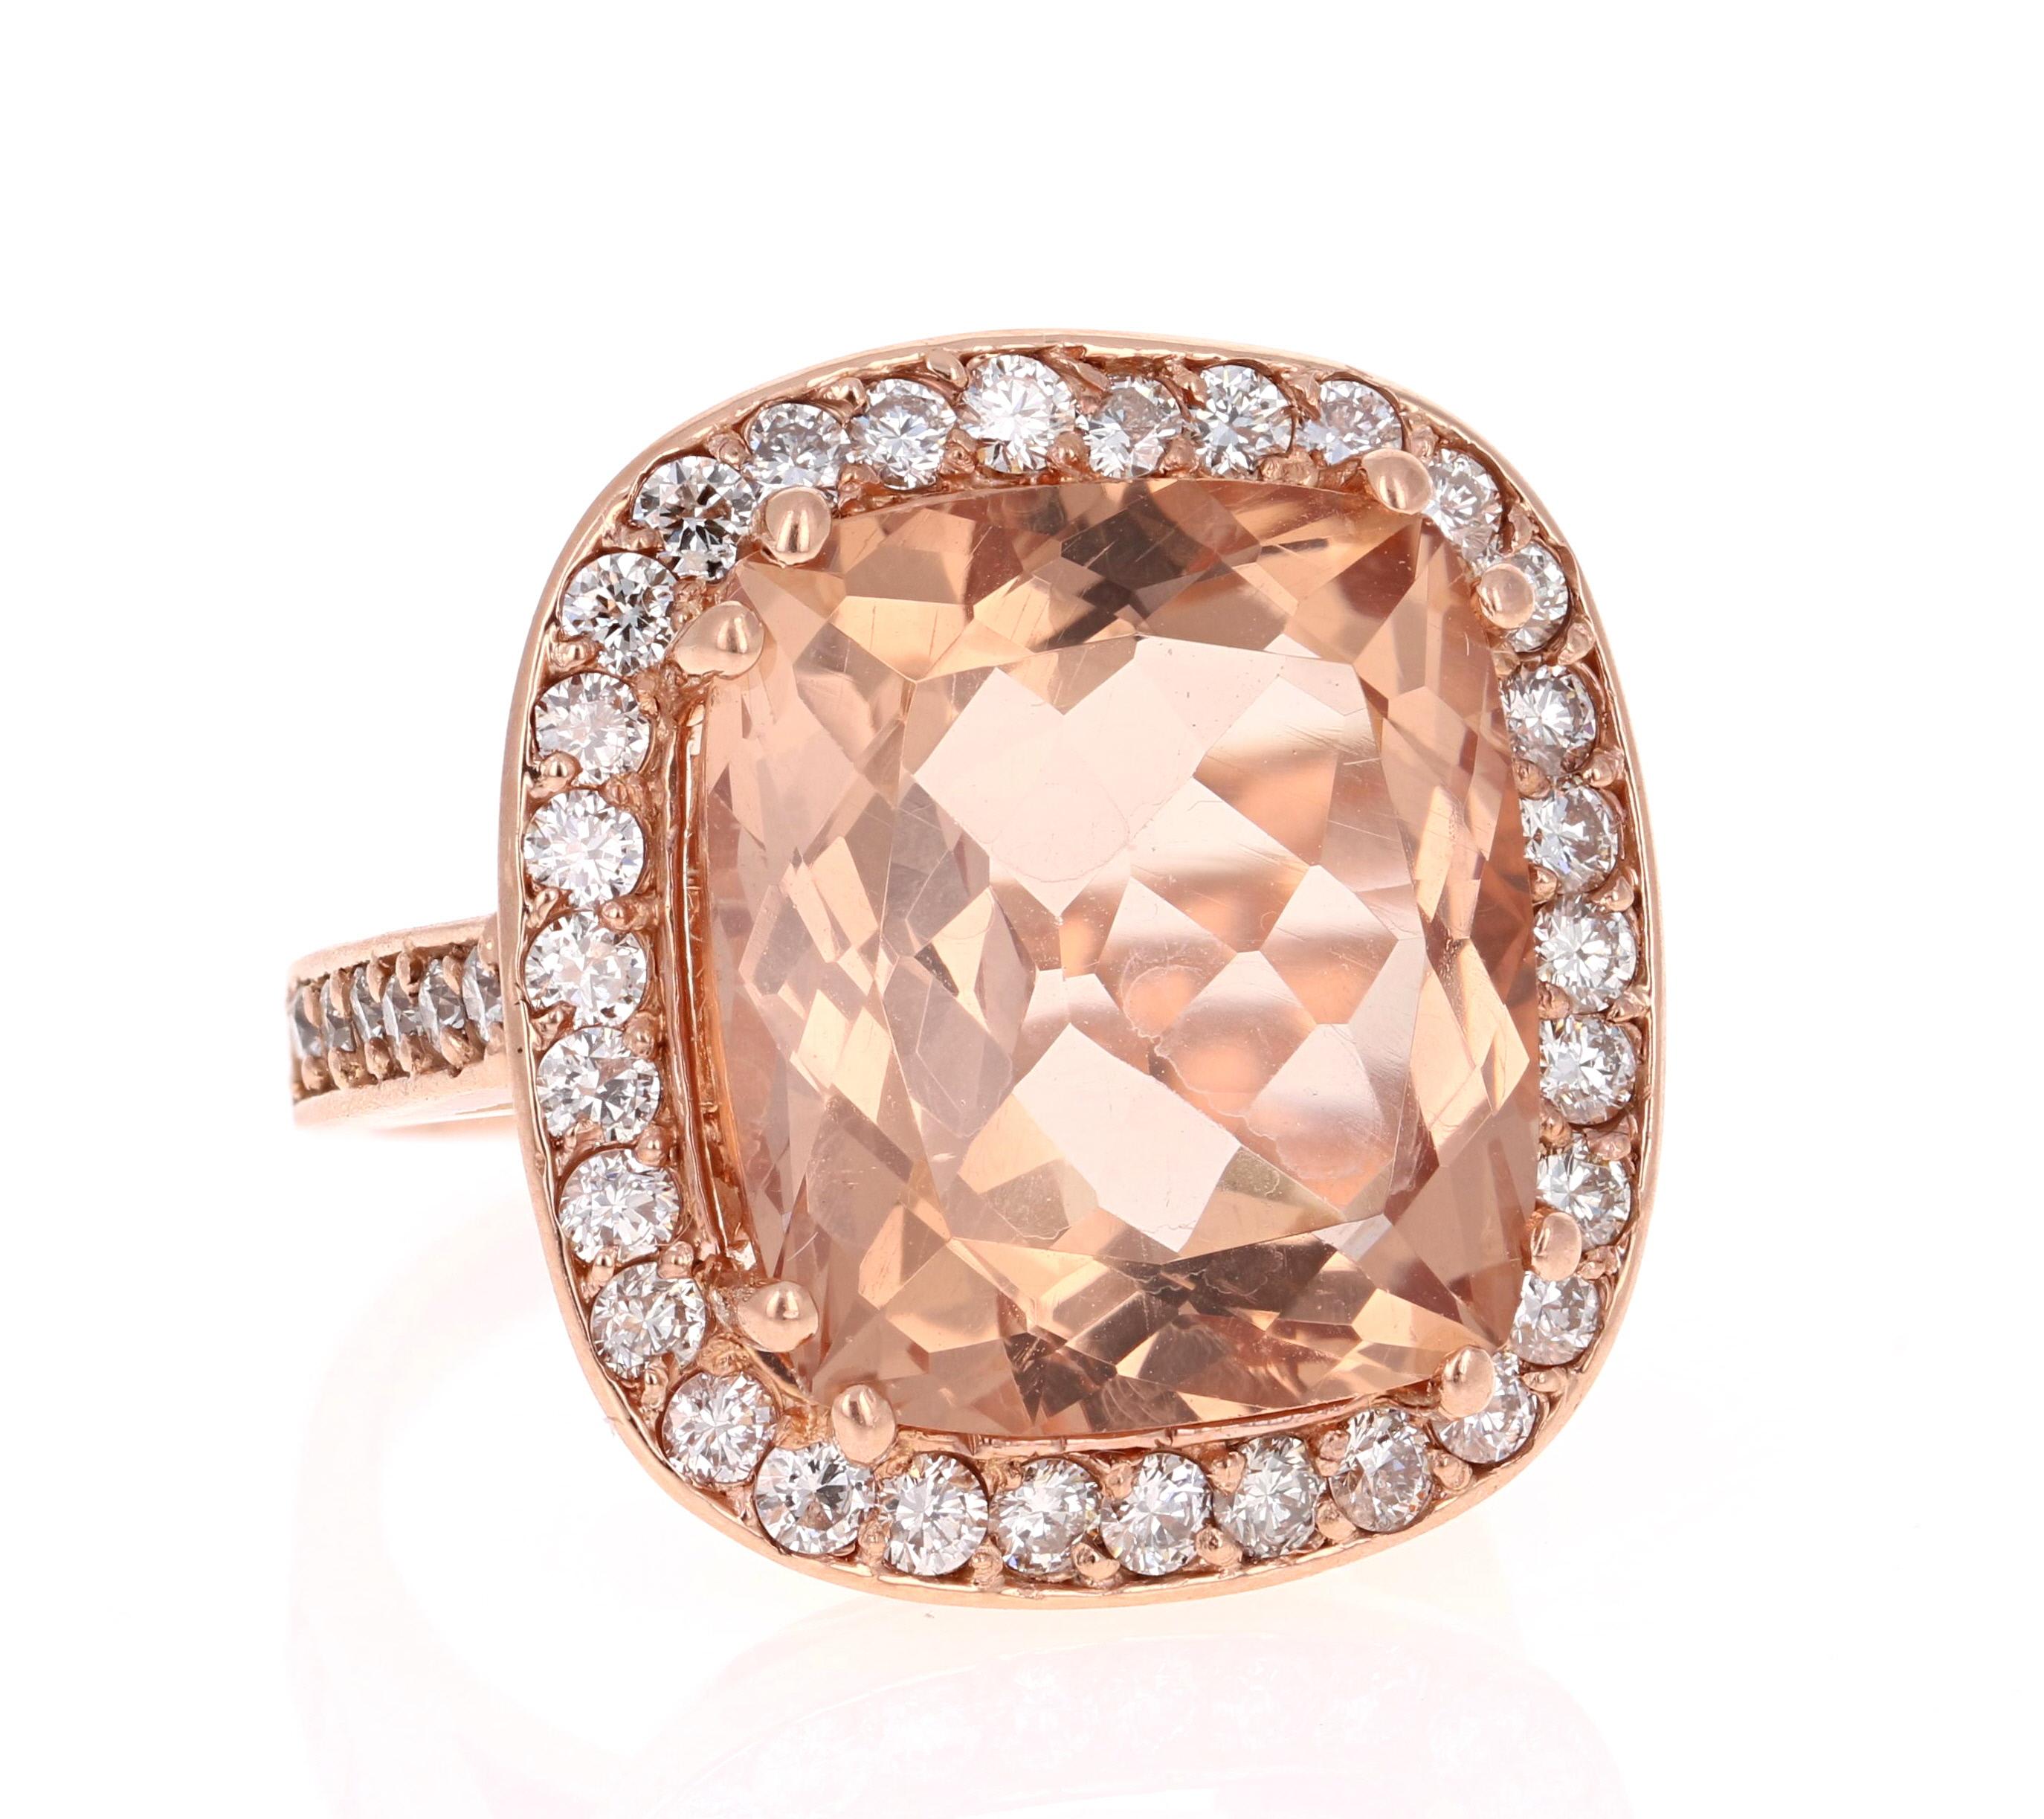 Statement Morganite Diamond Ring! 

This Morganite ring has a 14.69 Carat Cushion Cut Morganite and is surrounded by 42 Round Cut Diamonds that weigh 1.53 Carats. The total carat weight of the ring is 16.22 Carats.  

It is set in 14 Karat Rose Gold